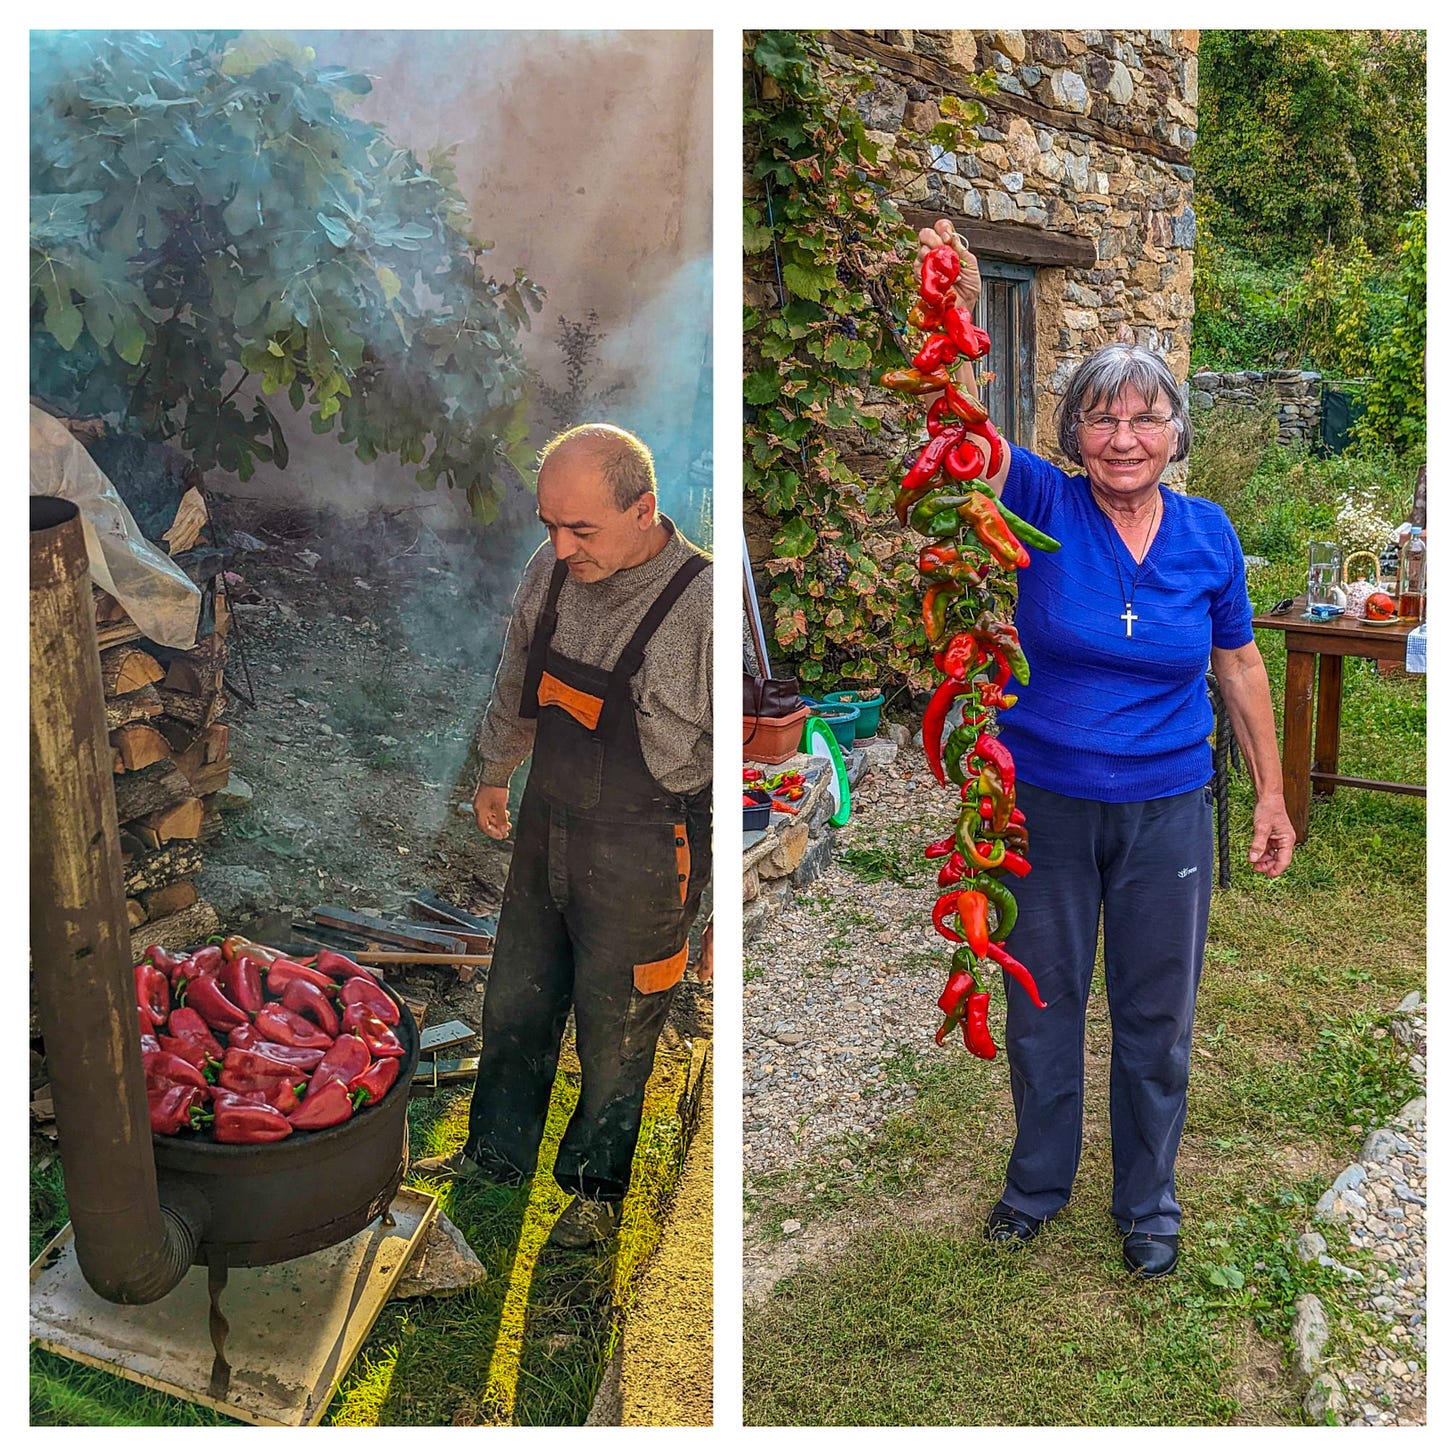 The photo on the left shows a man roasting red peppers, the photo on the right a woman holding up a string of red peppers. 